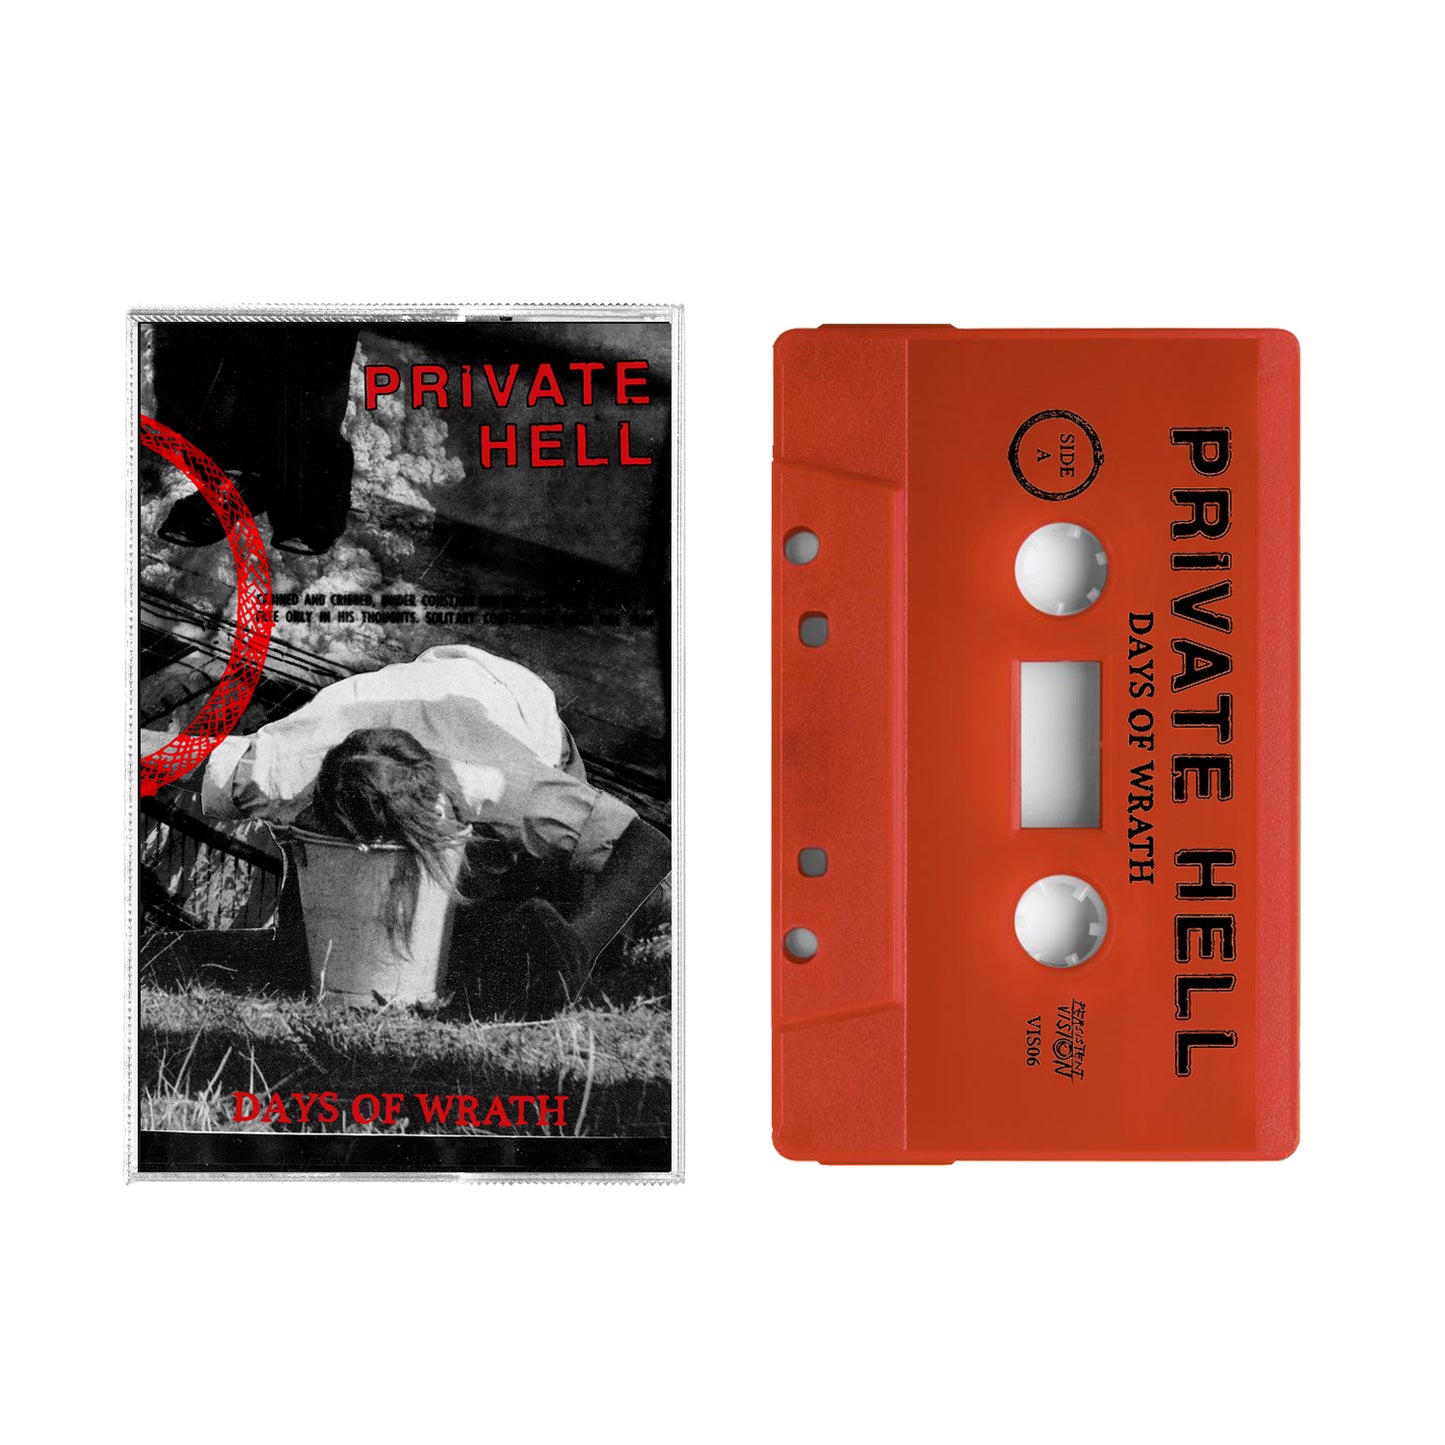 Private Hell "Days of Wrath" Cassette